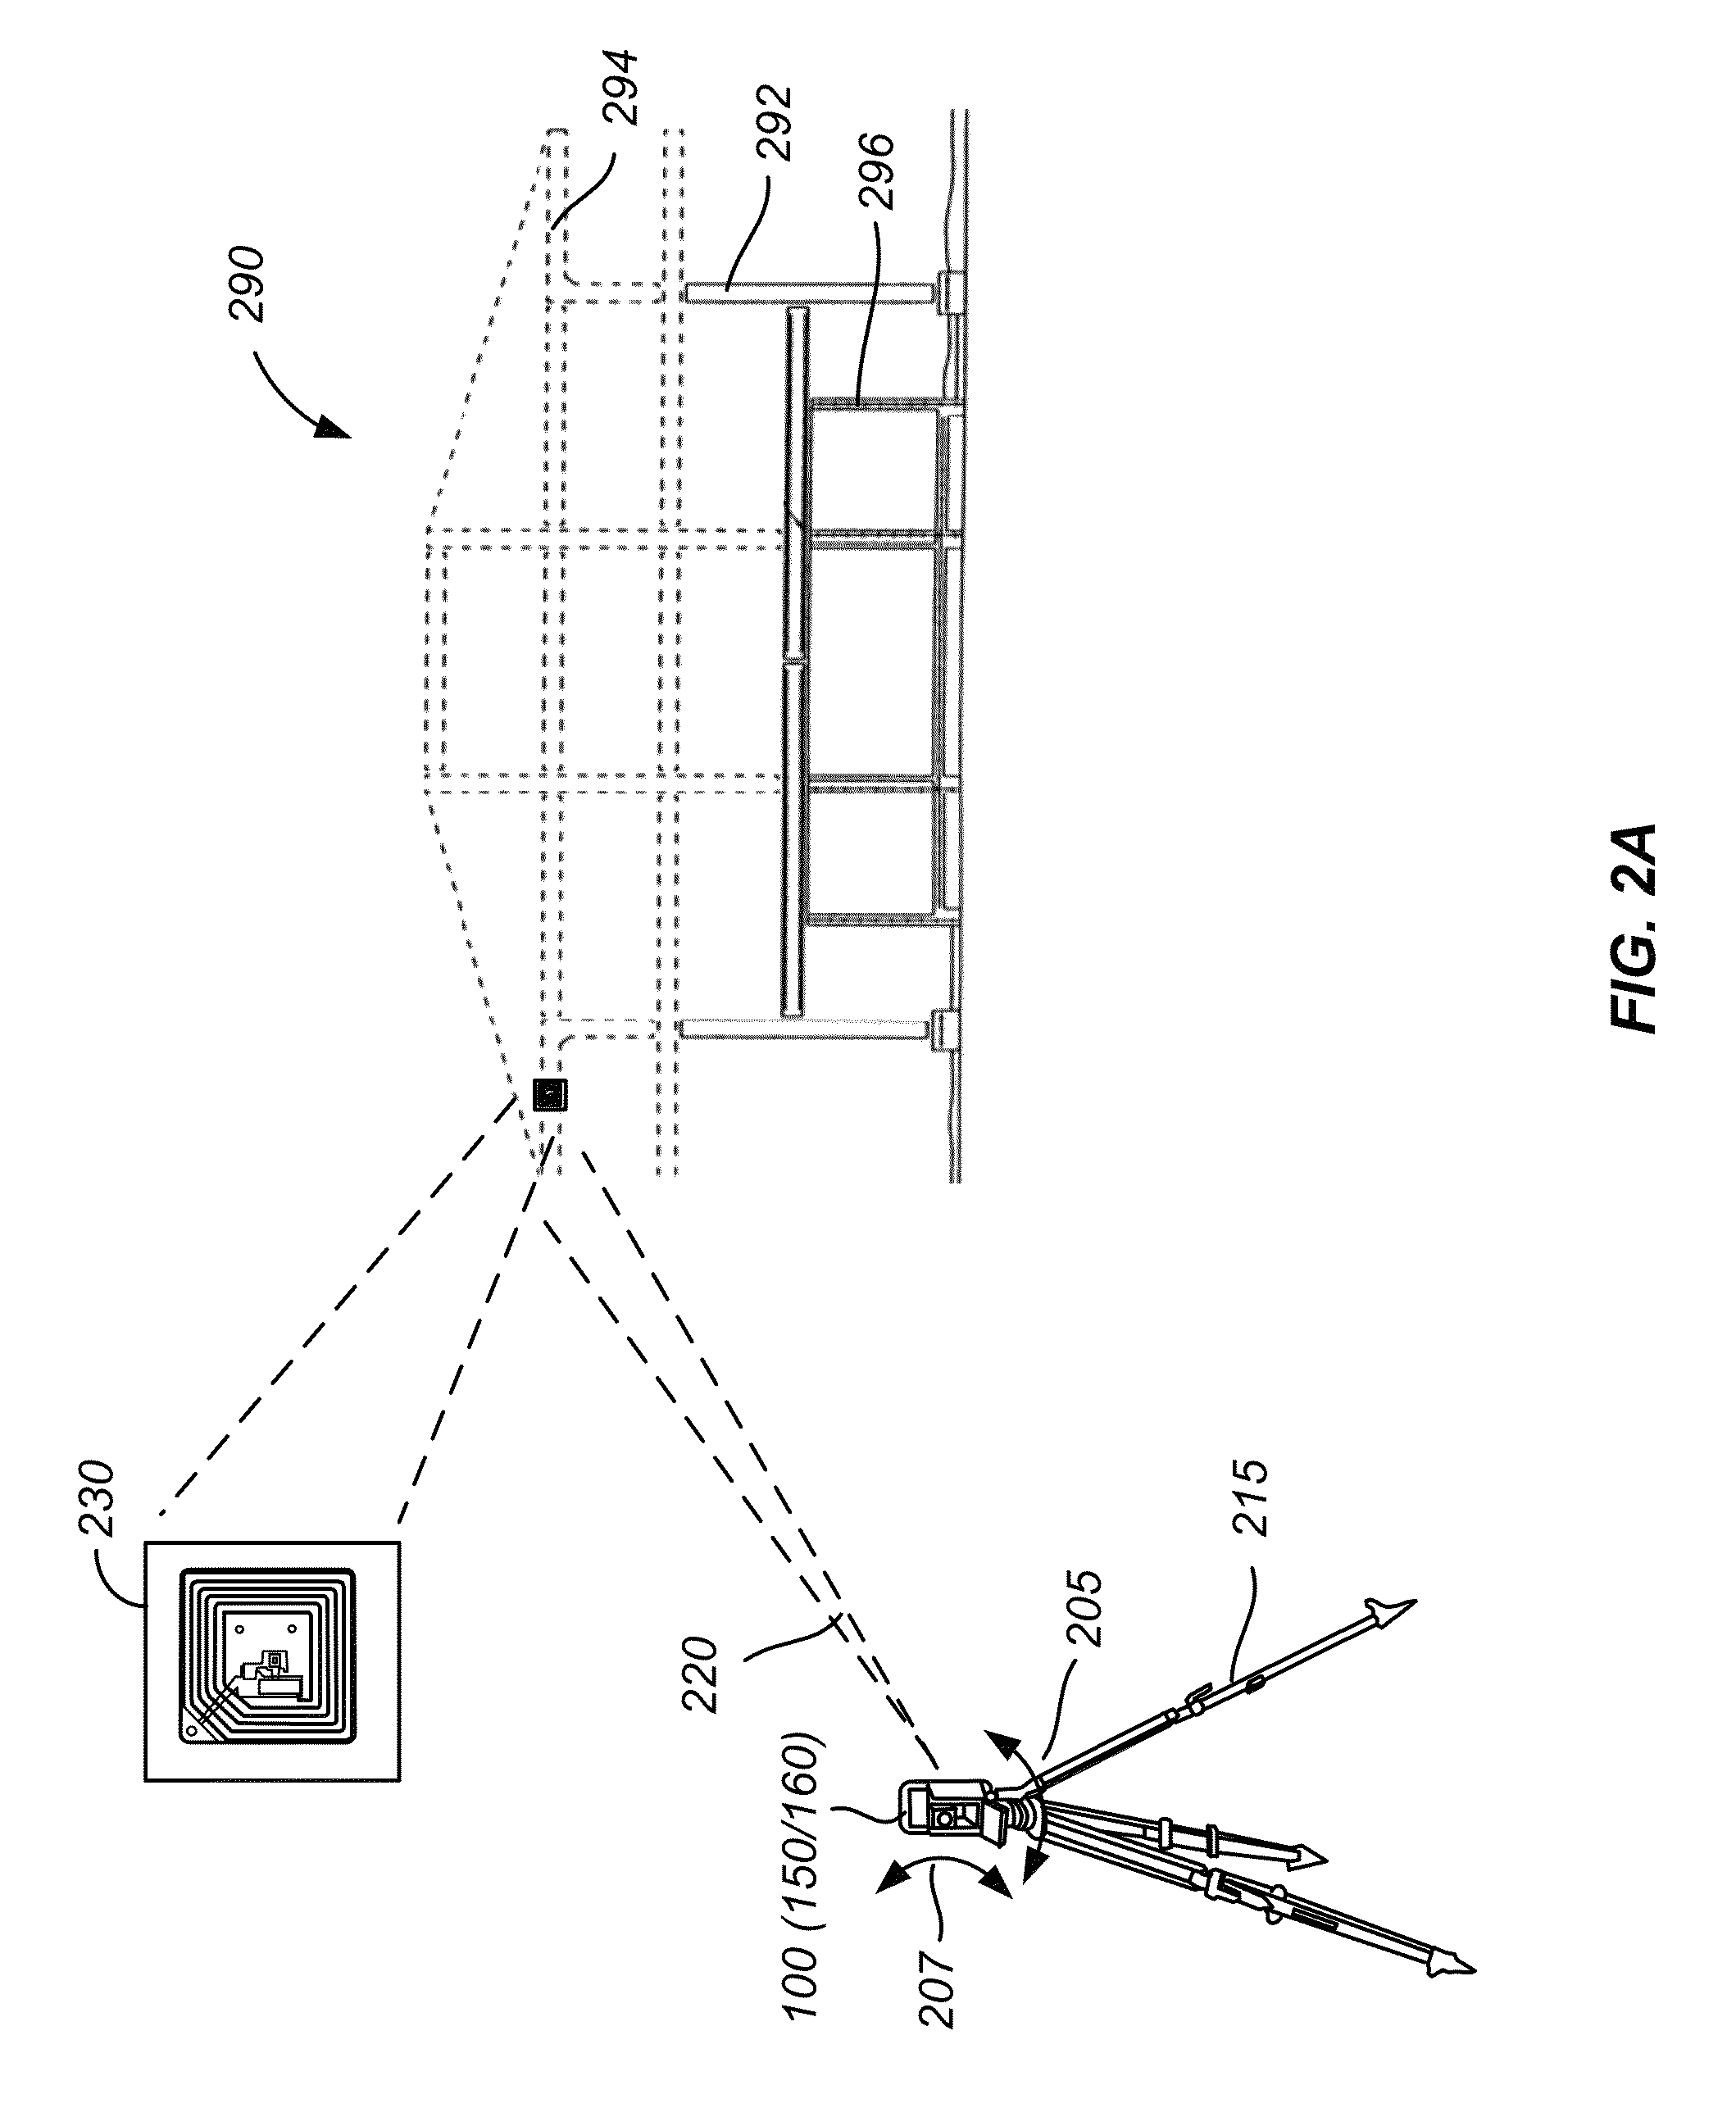 Method and system for RFID-assisted imaging